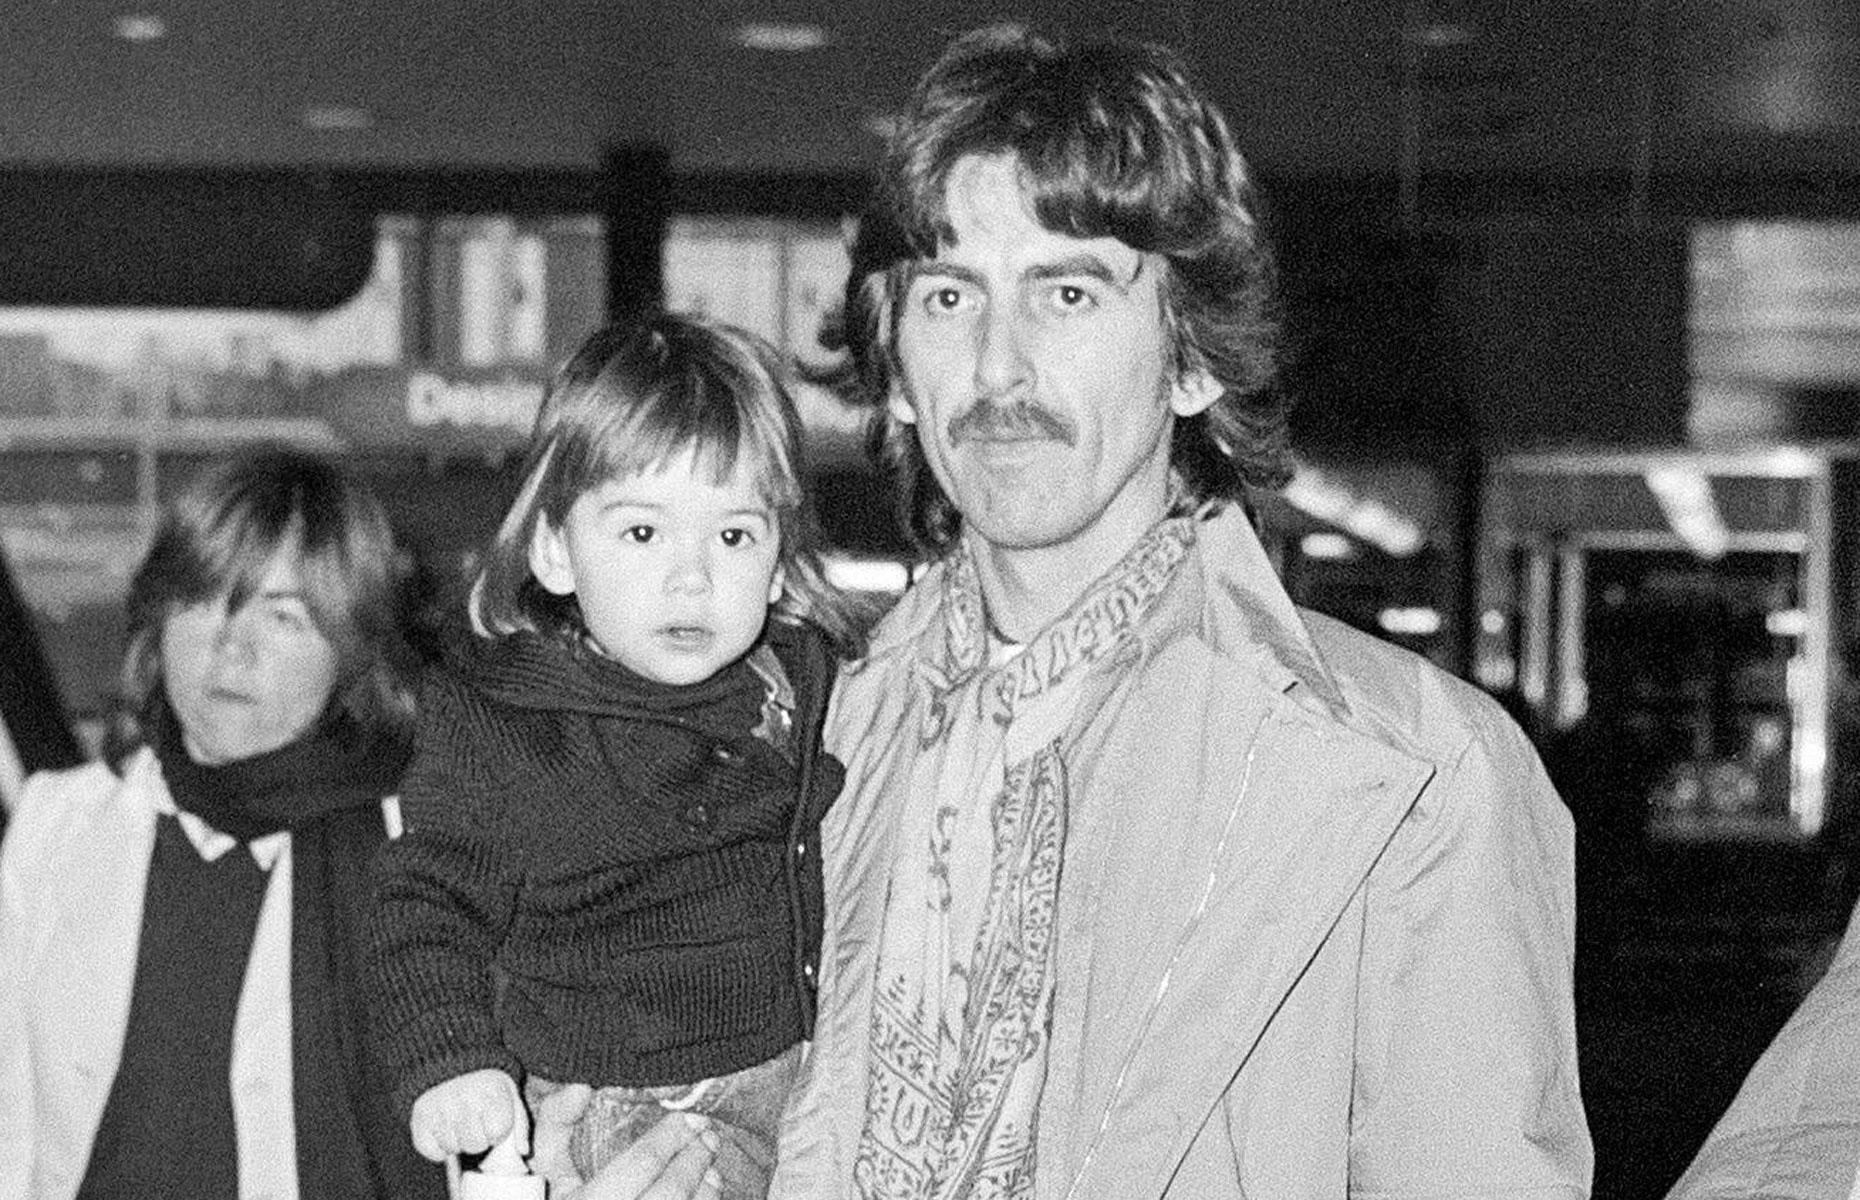 <p>Dhani Harrison, who was born in 1978, is the one and only son of George Harrison and his second wife Olivia Arias. George was previously married to model Pattie Boyd, but the couple had no kids together.</p>  <p>Dhani, who was named after the sixth and seventh notes of the Indian music scale, started out his career by assisting his dad in the recording studio.</p>